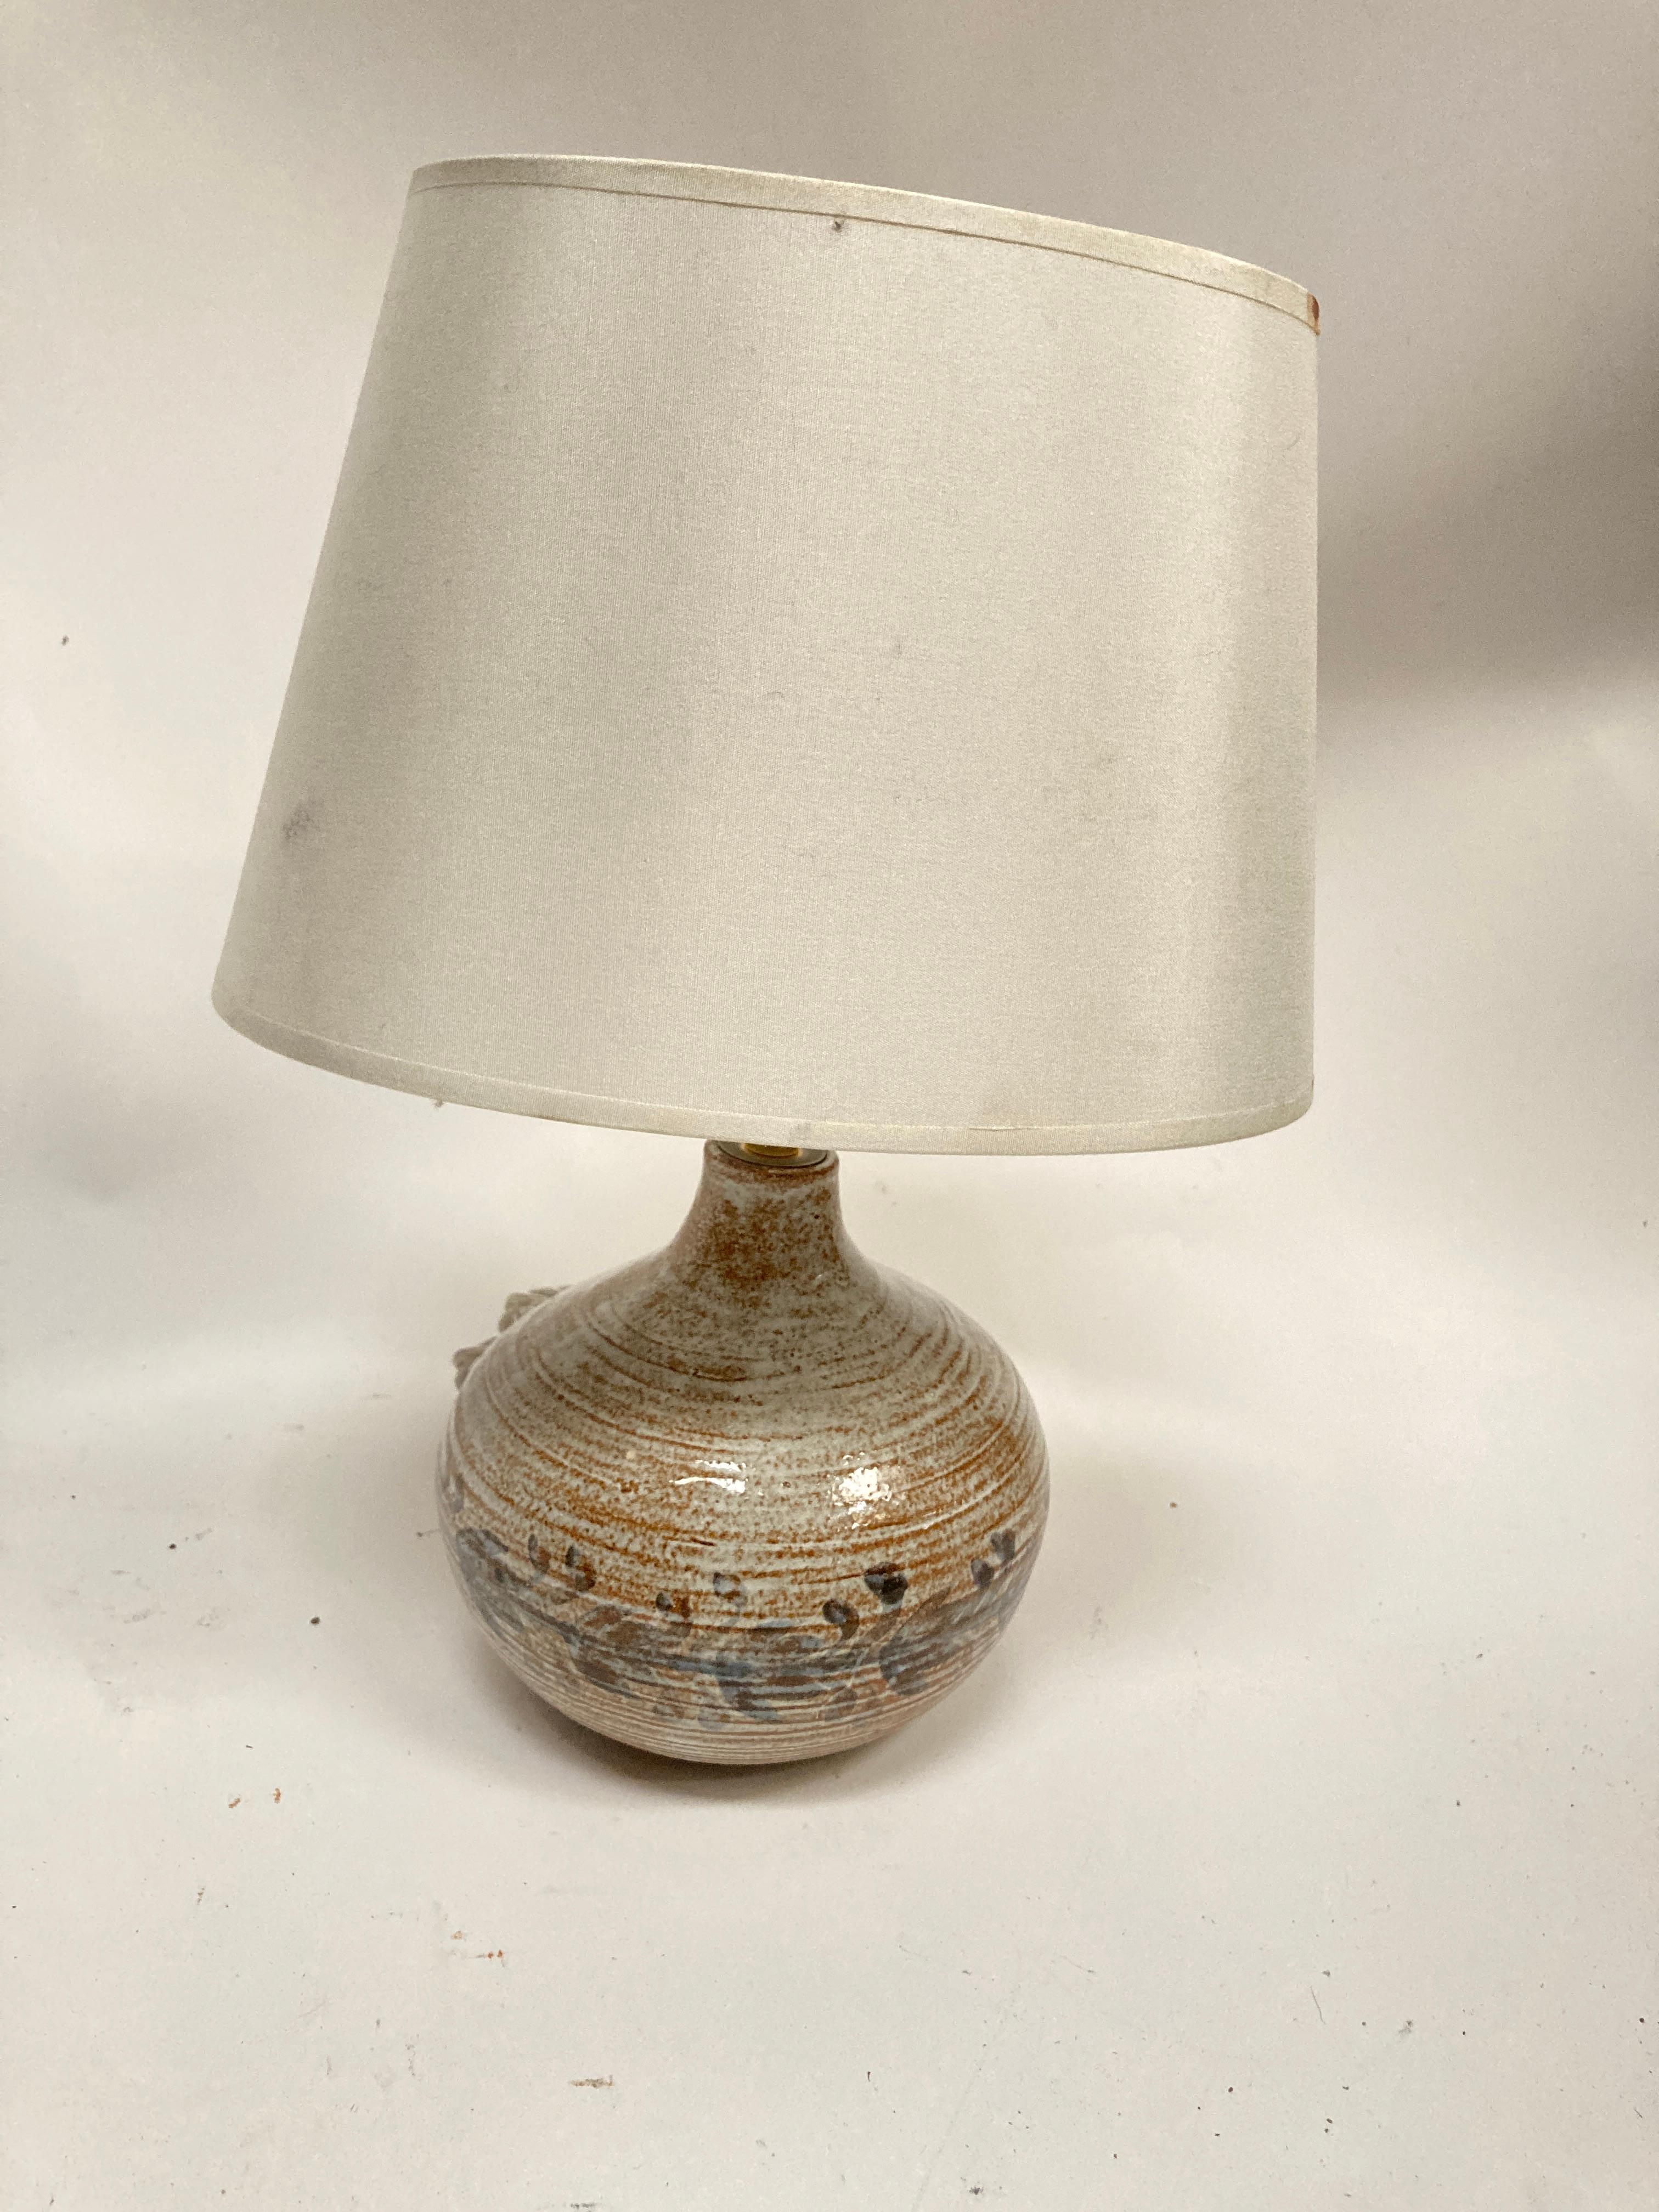 1970's studio Pottery ceramic lamp
One of a kind / Hand made
Vallauris 
France
Dimensions given without shade
No shade included